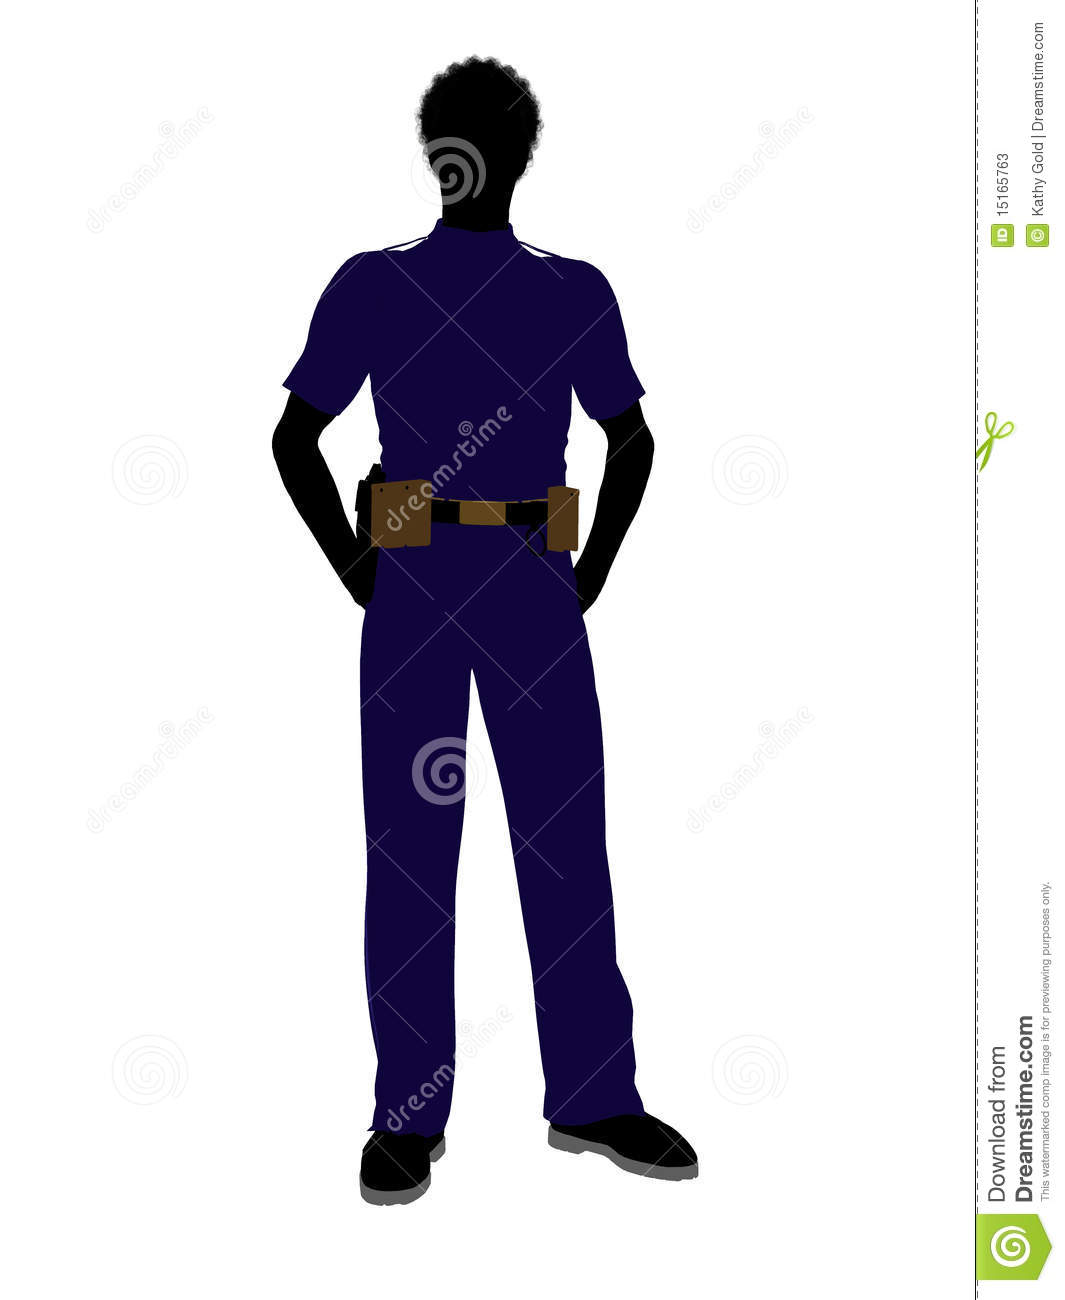 African American Male Police Officer Silhouette Stock Photos   Image    